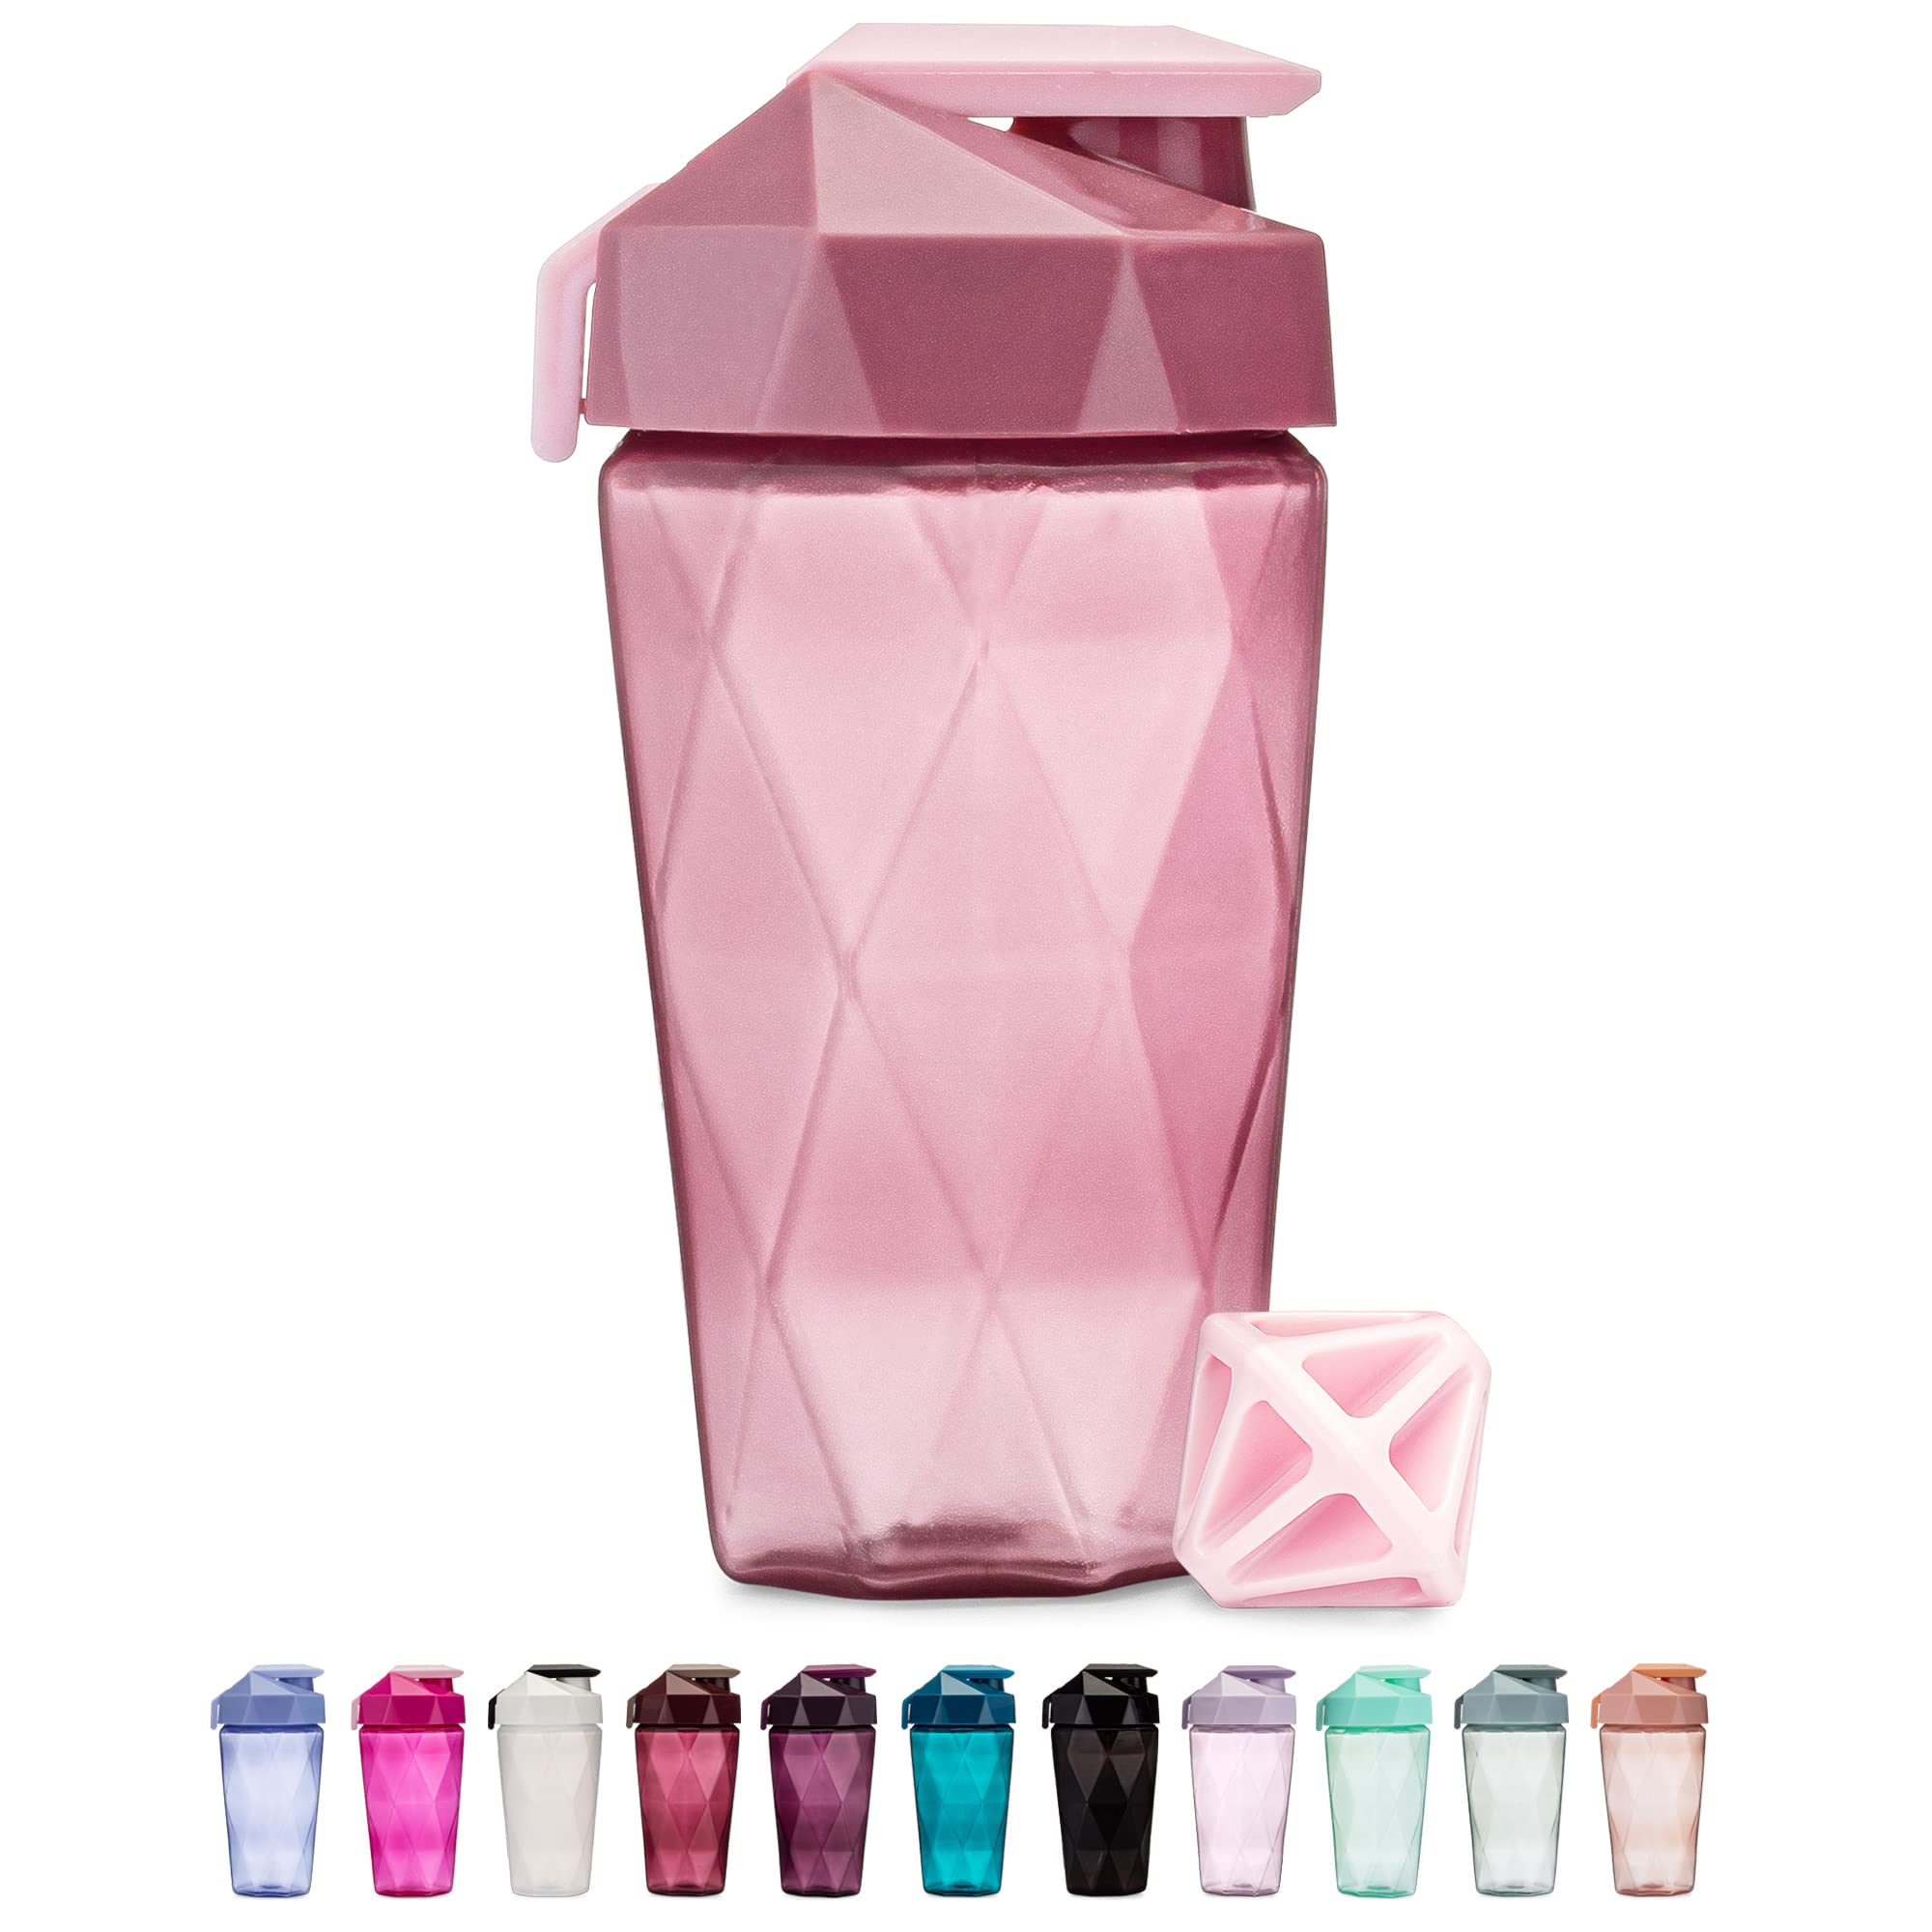 Keelo Bottle Classic Shaker Bottle 20 Ounce Protein Shaker Bottle Shaker Cup With Carrying Handle And Diamond Agitator Rose - 20